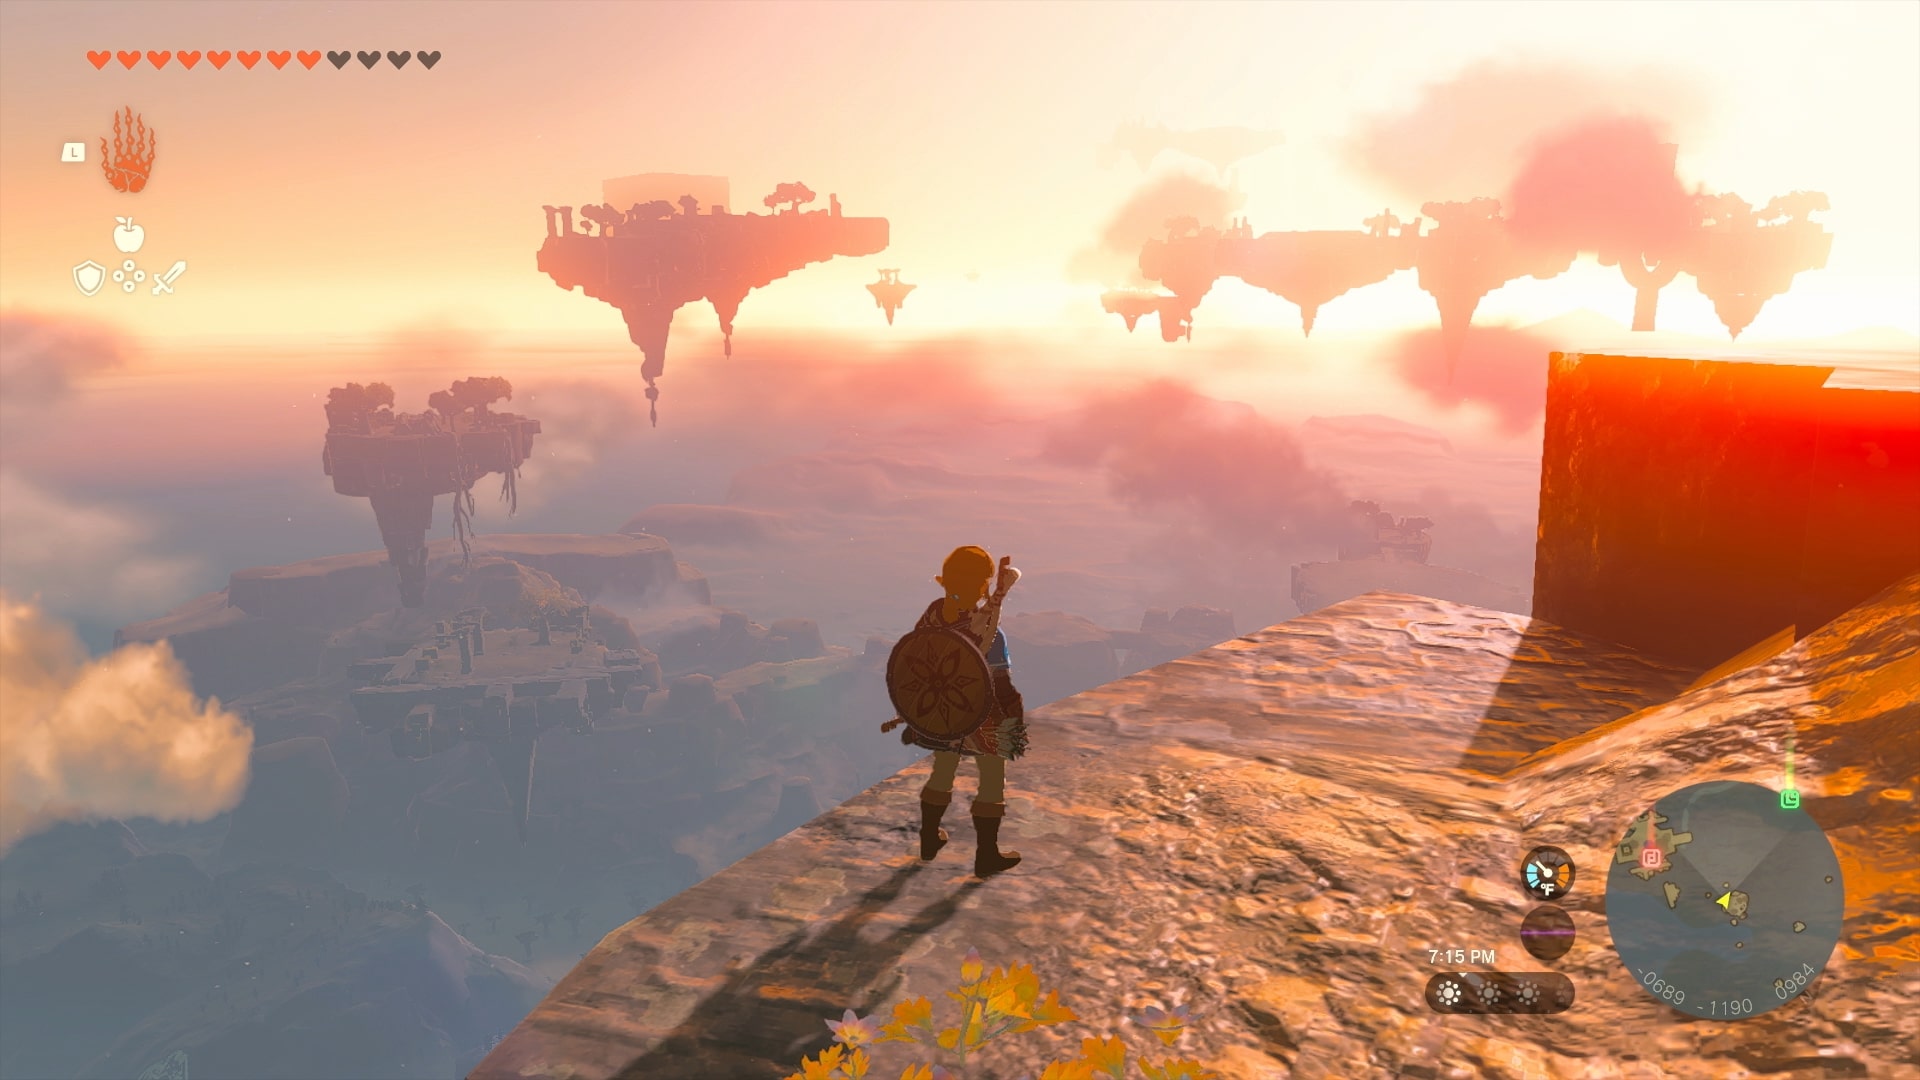 The Legend of Zelda: Breath of the Wild blew me away at E3